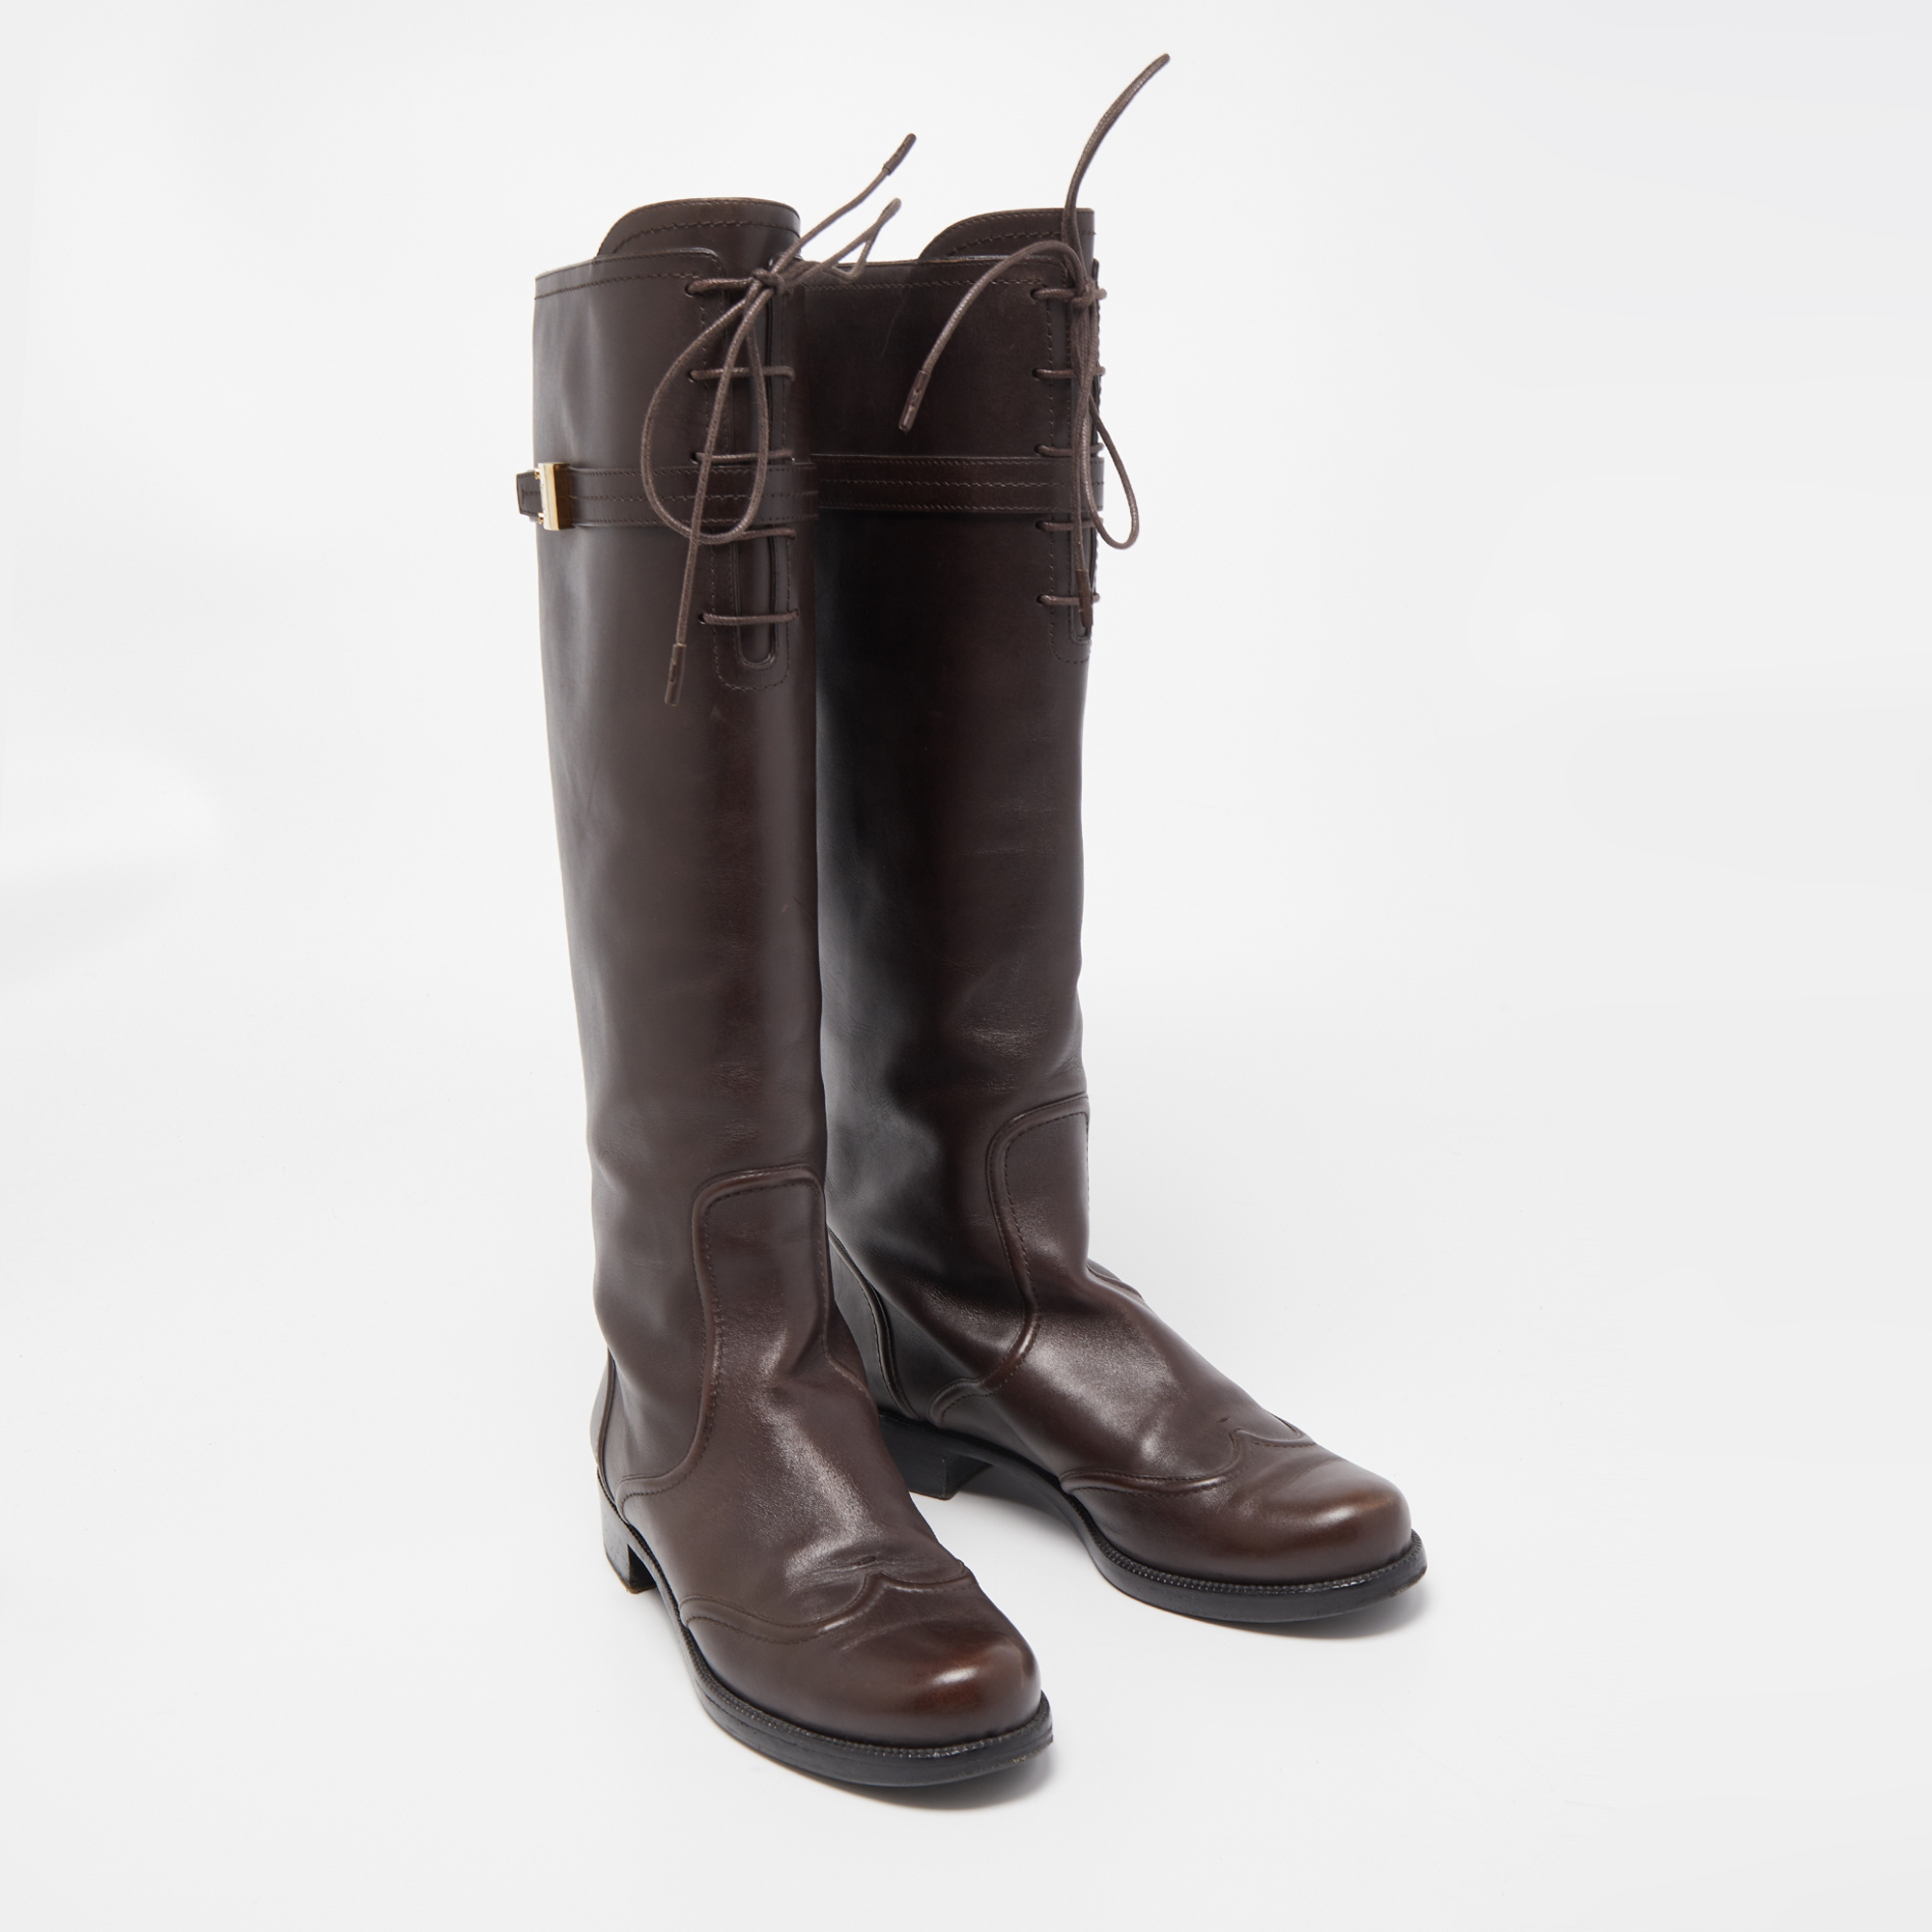 Louis Vuitton Brown Leather Knee Length Boots Size 39